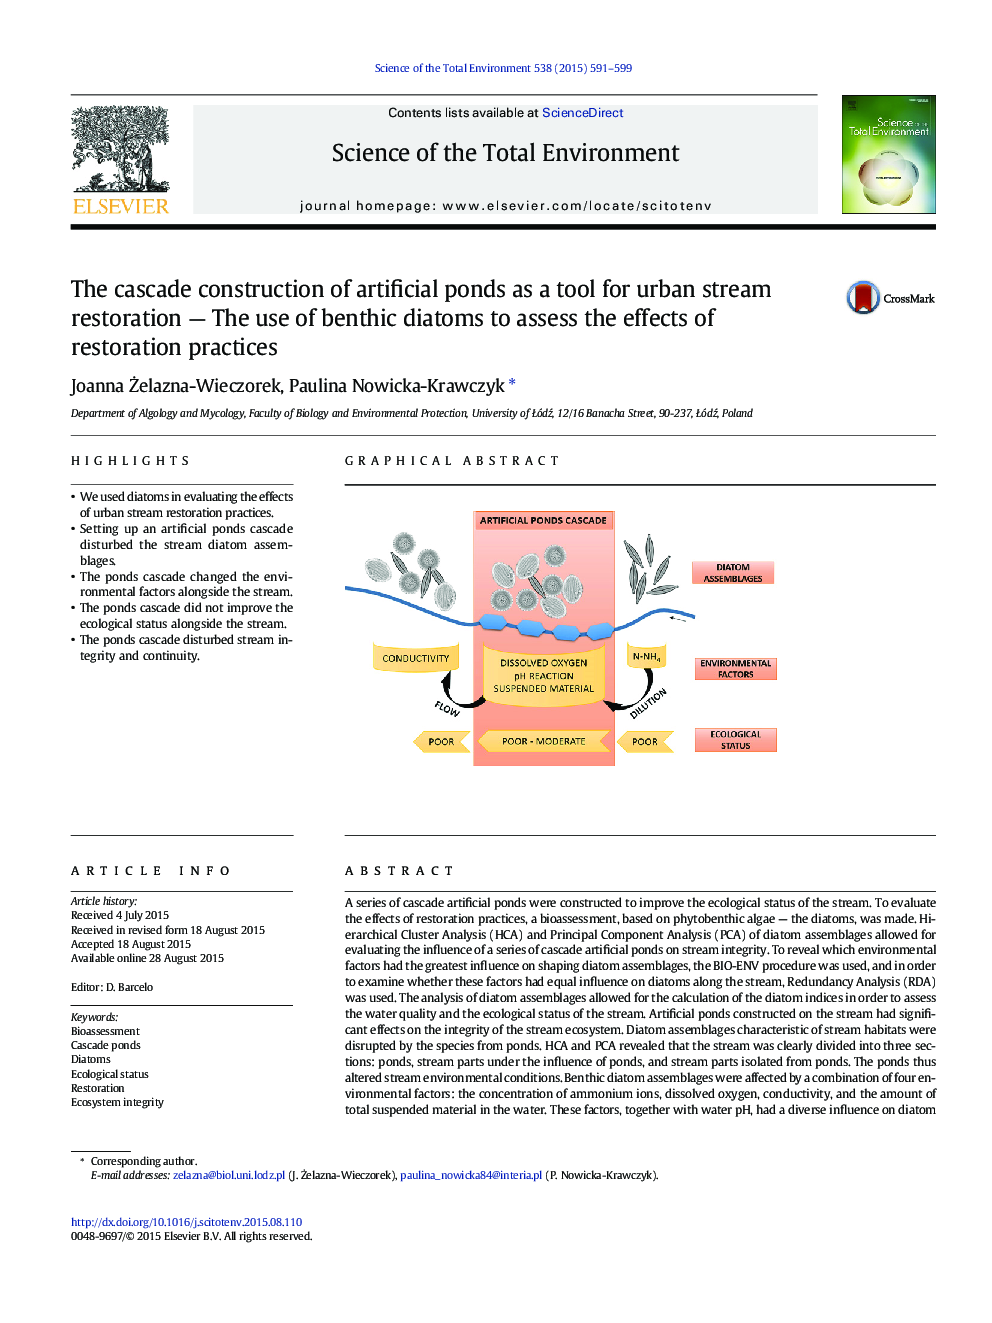 The cascade construction of artificial ponds as a tool for urban stream restoration - The use of benthic diatoms to assess the effects of restoration practices